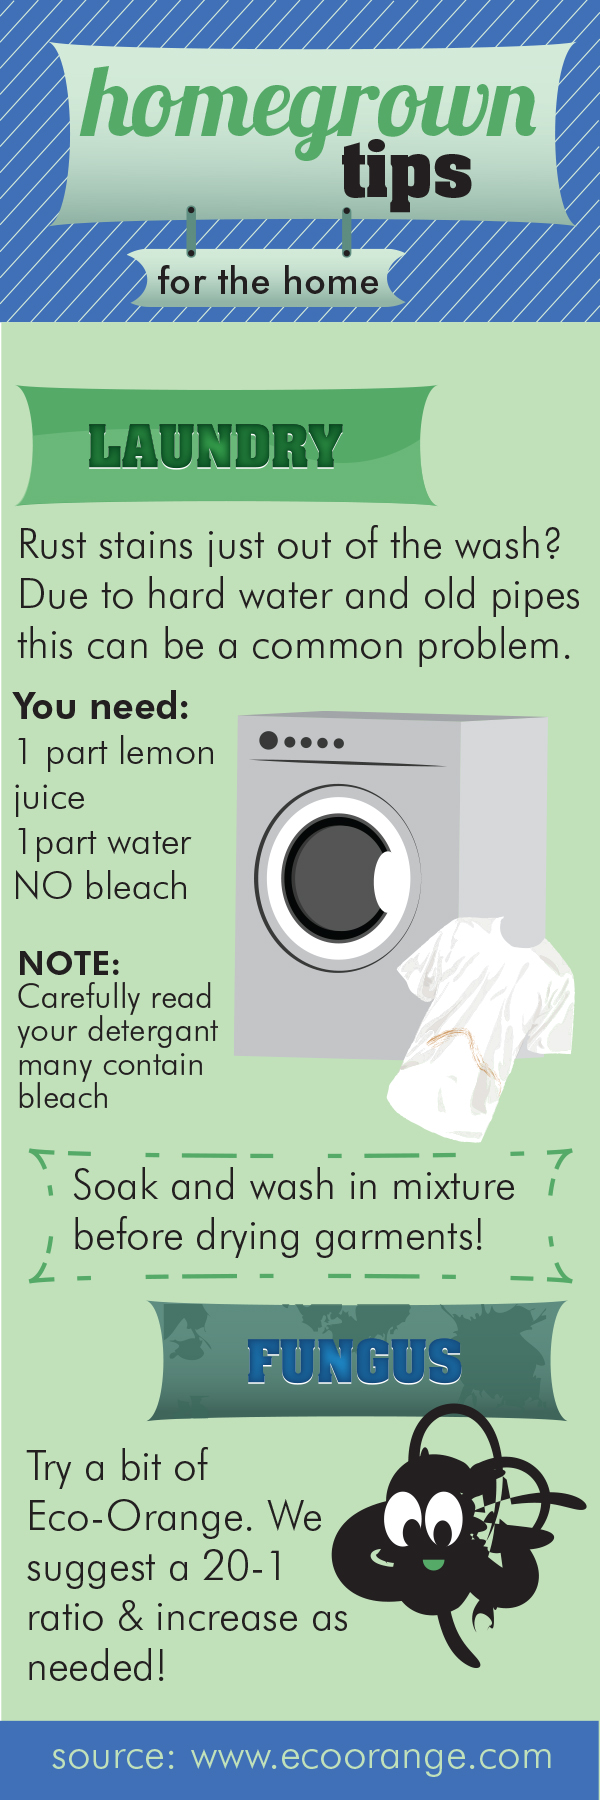 Home-Grown Tips- Laundry